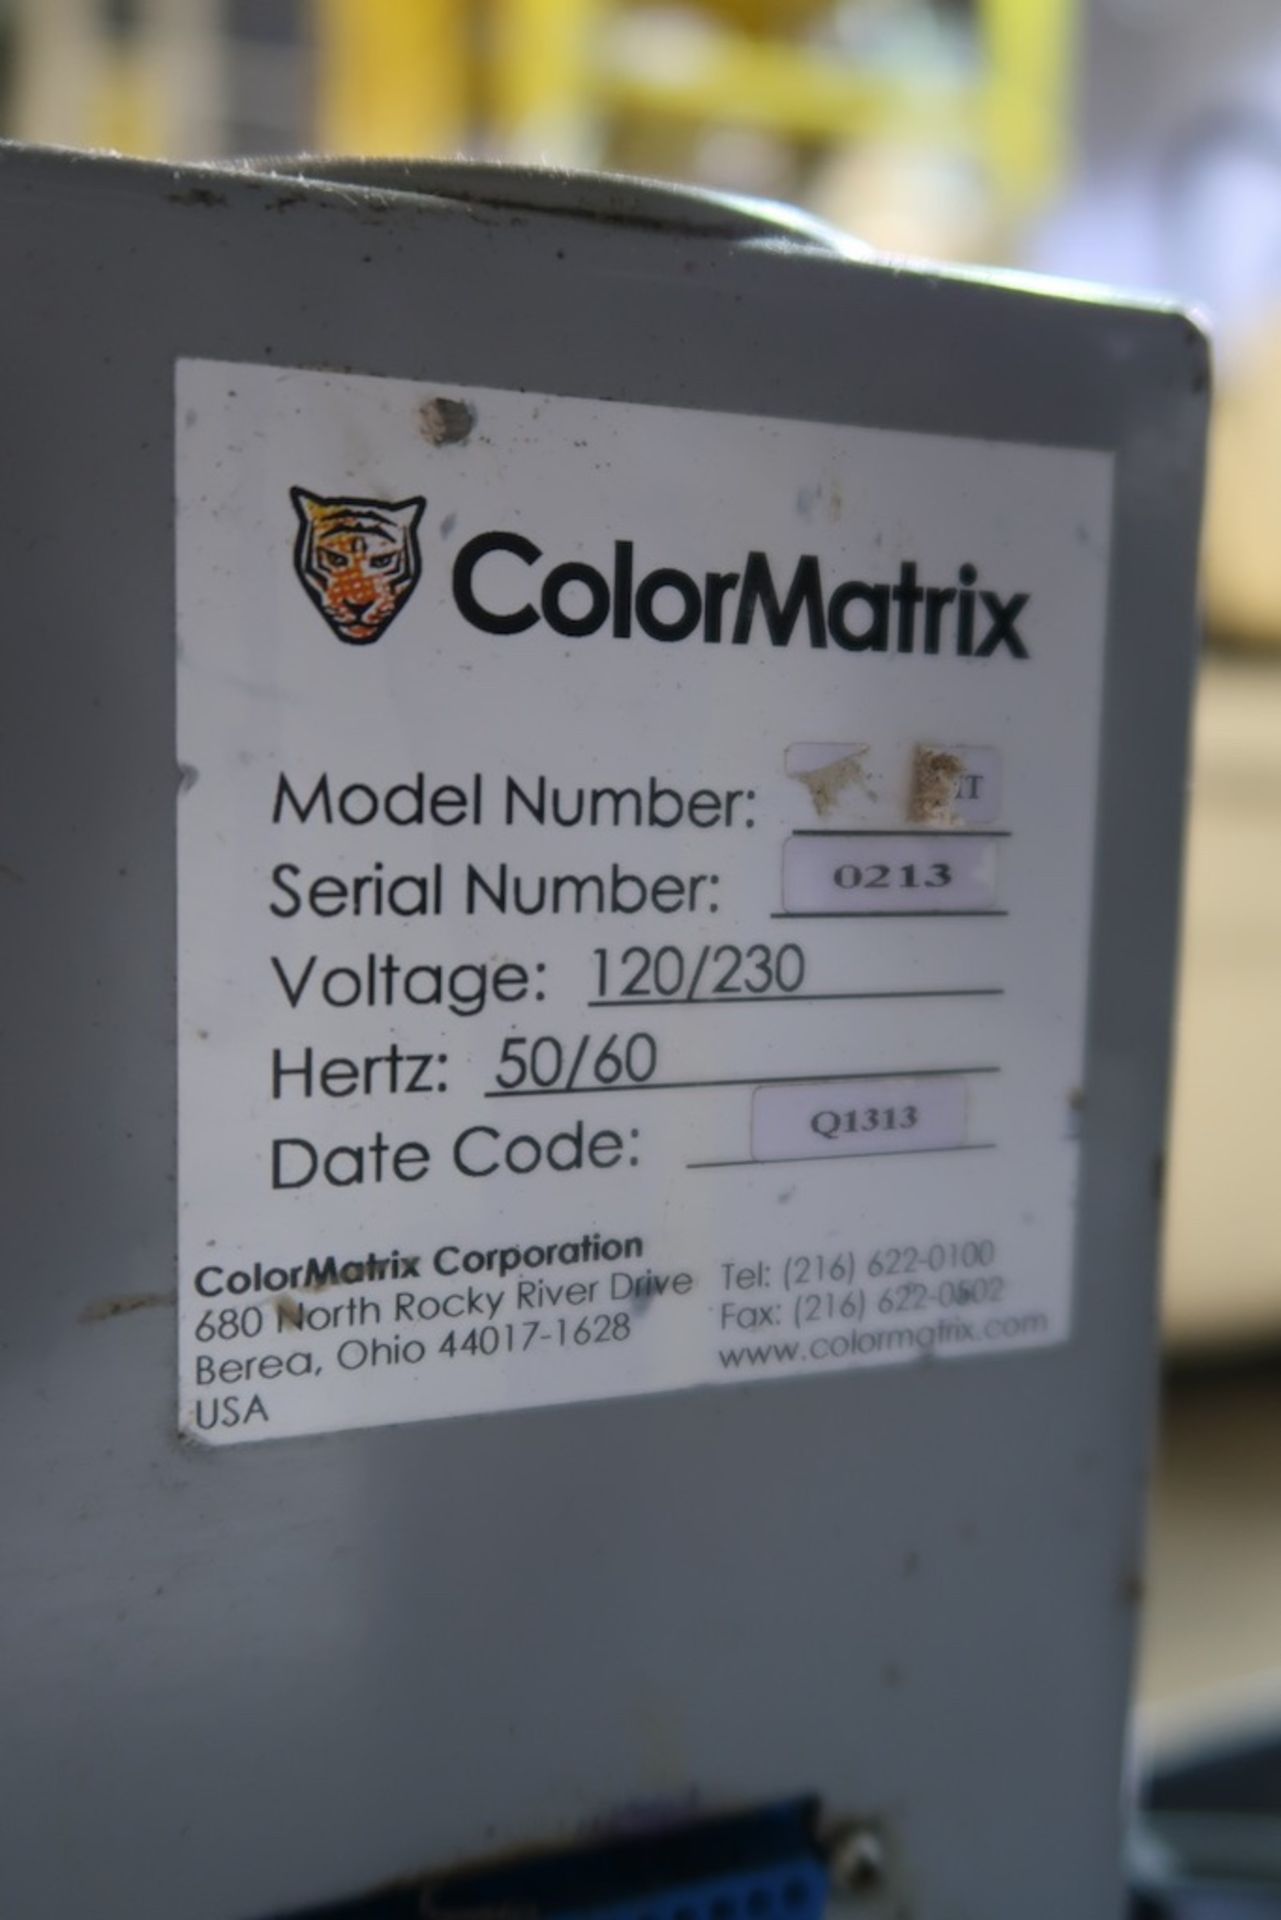 ColorMatrix Color Metering System with Tuskin Bucket Tumbler - Image 3 of 4